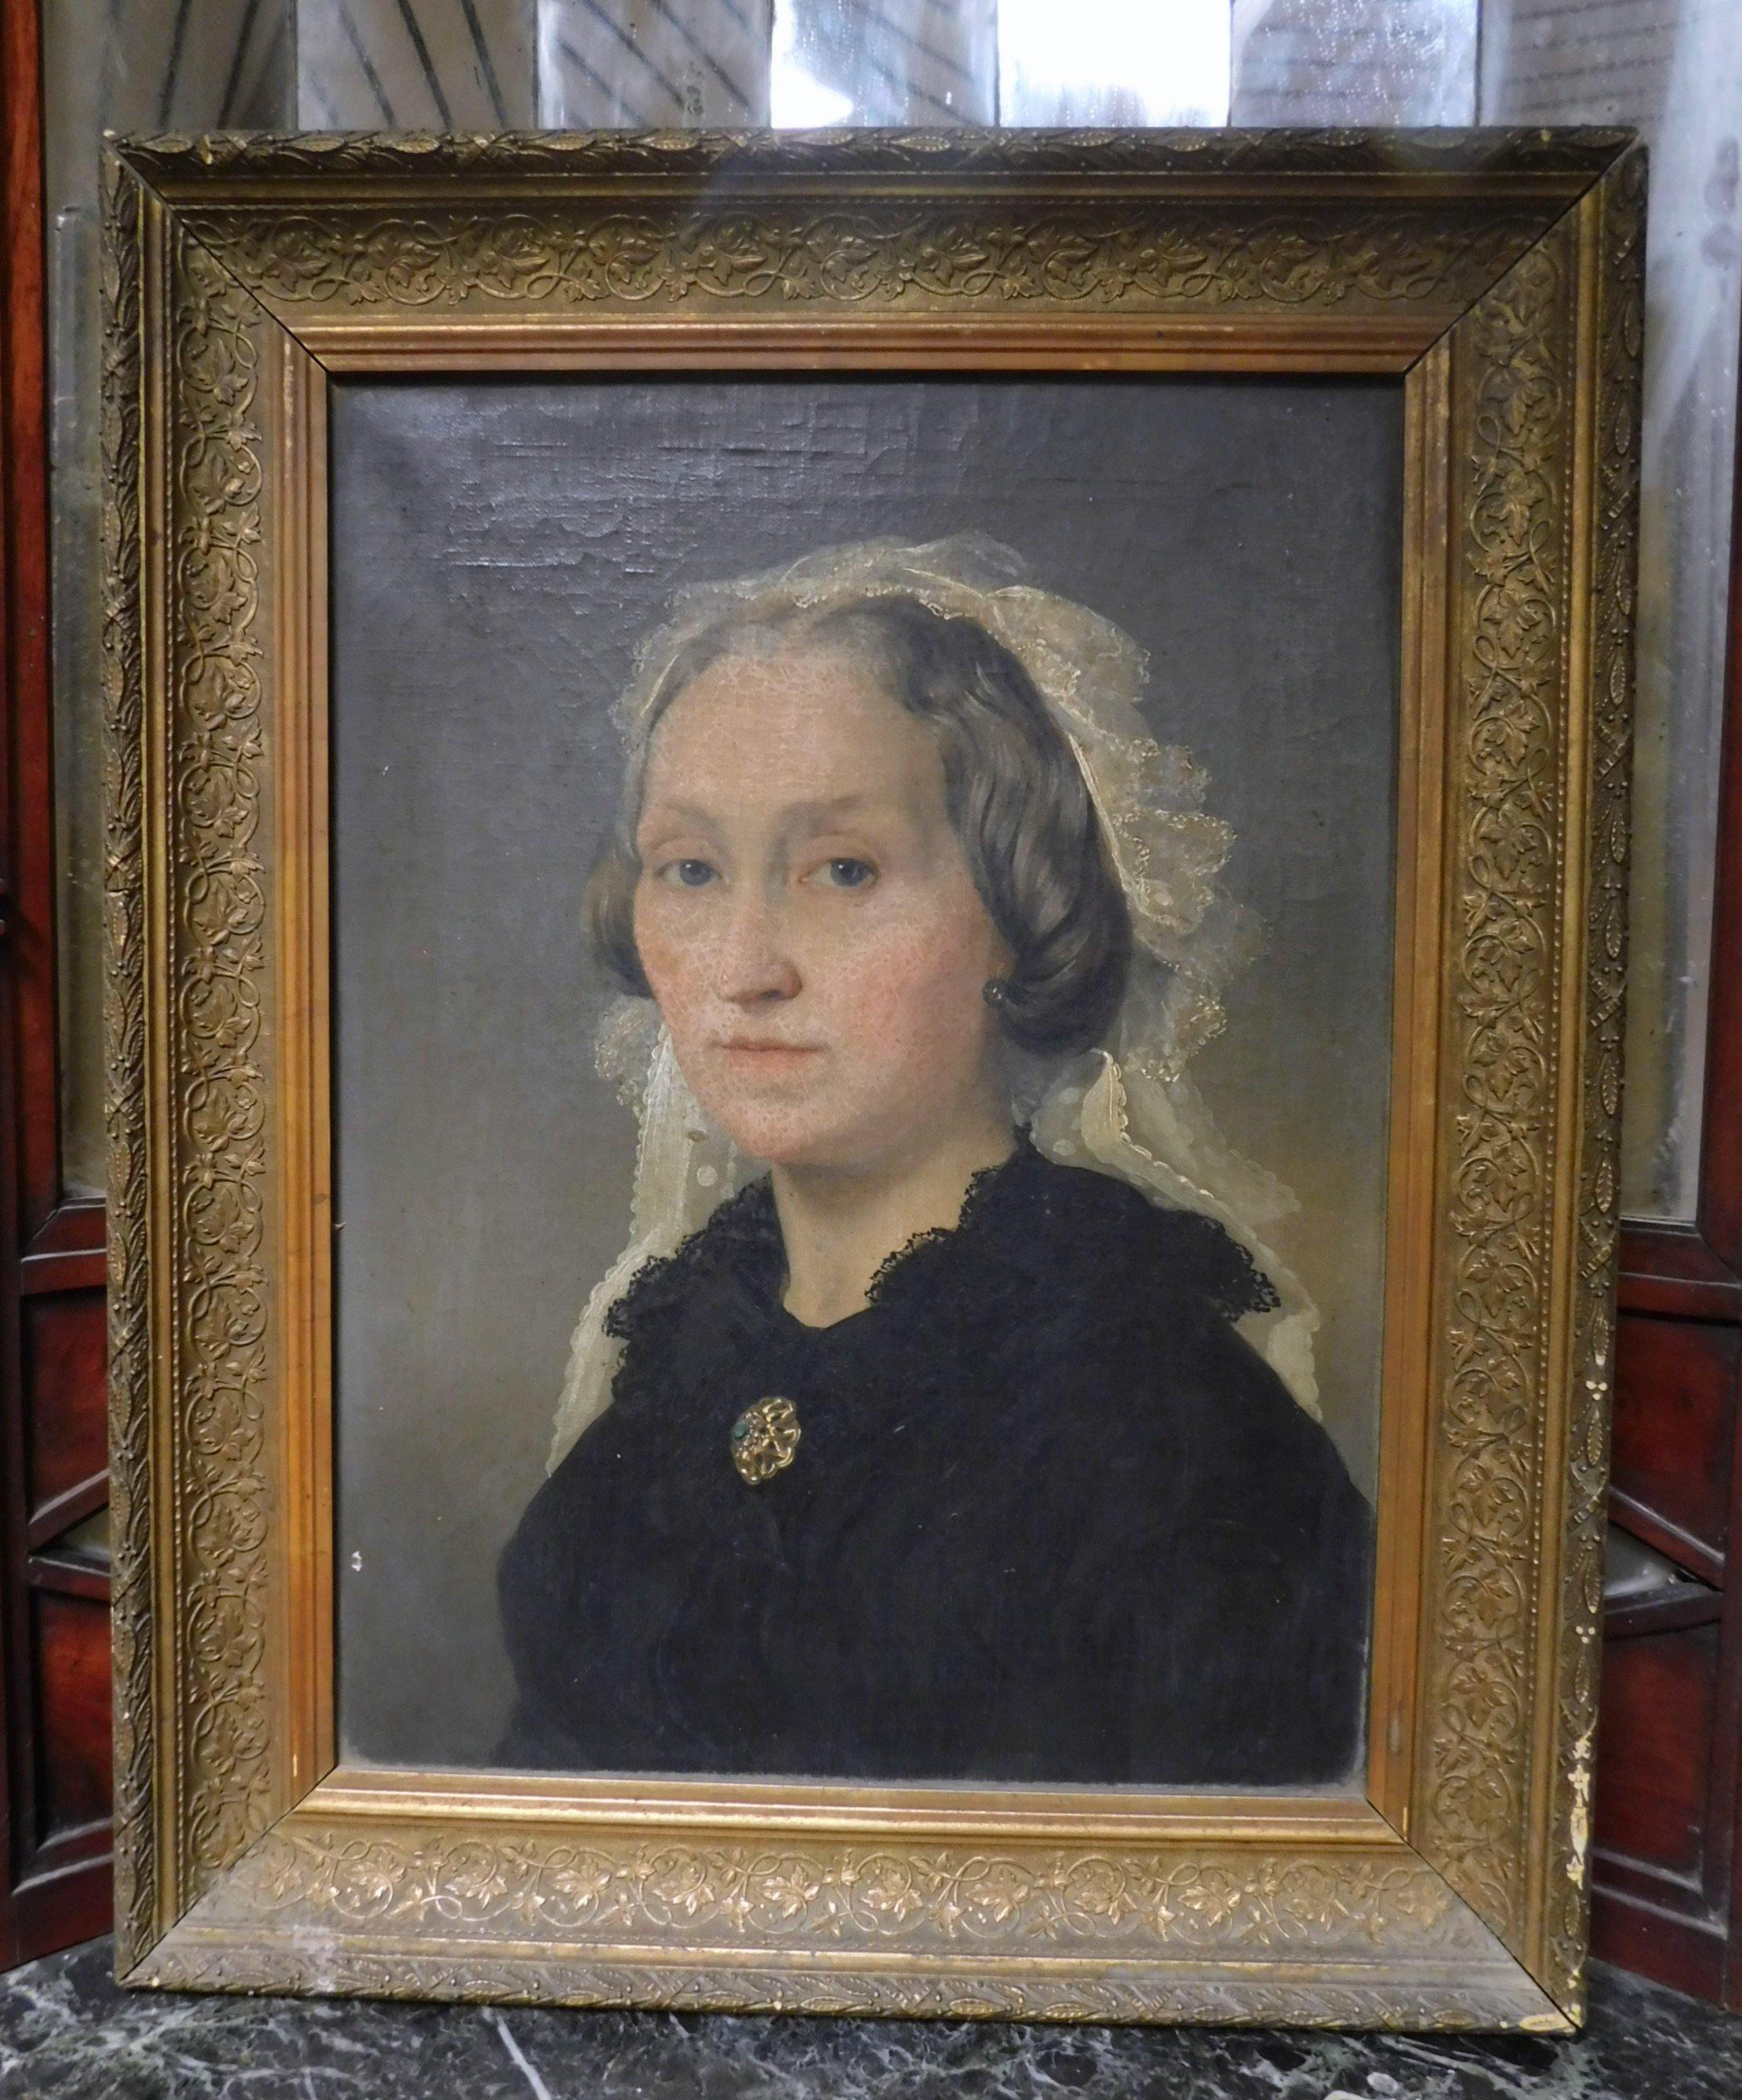 Antique oil painting on canvas, portrait of a lady with black dress, canvas with coeval sculpted and gilded frame, painted by an unknown artist in the 19th century, from Italy.